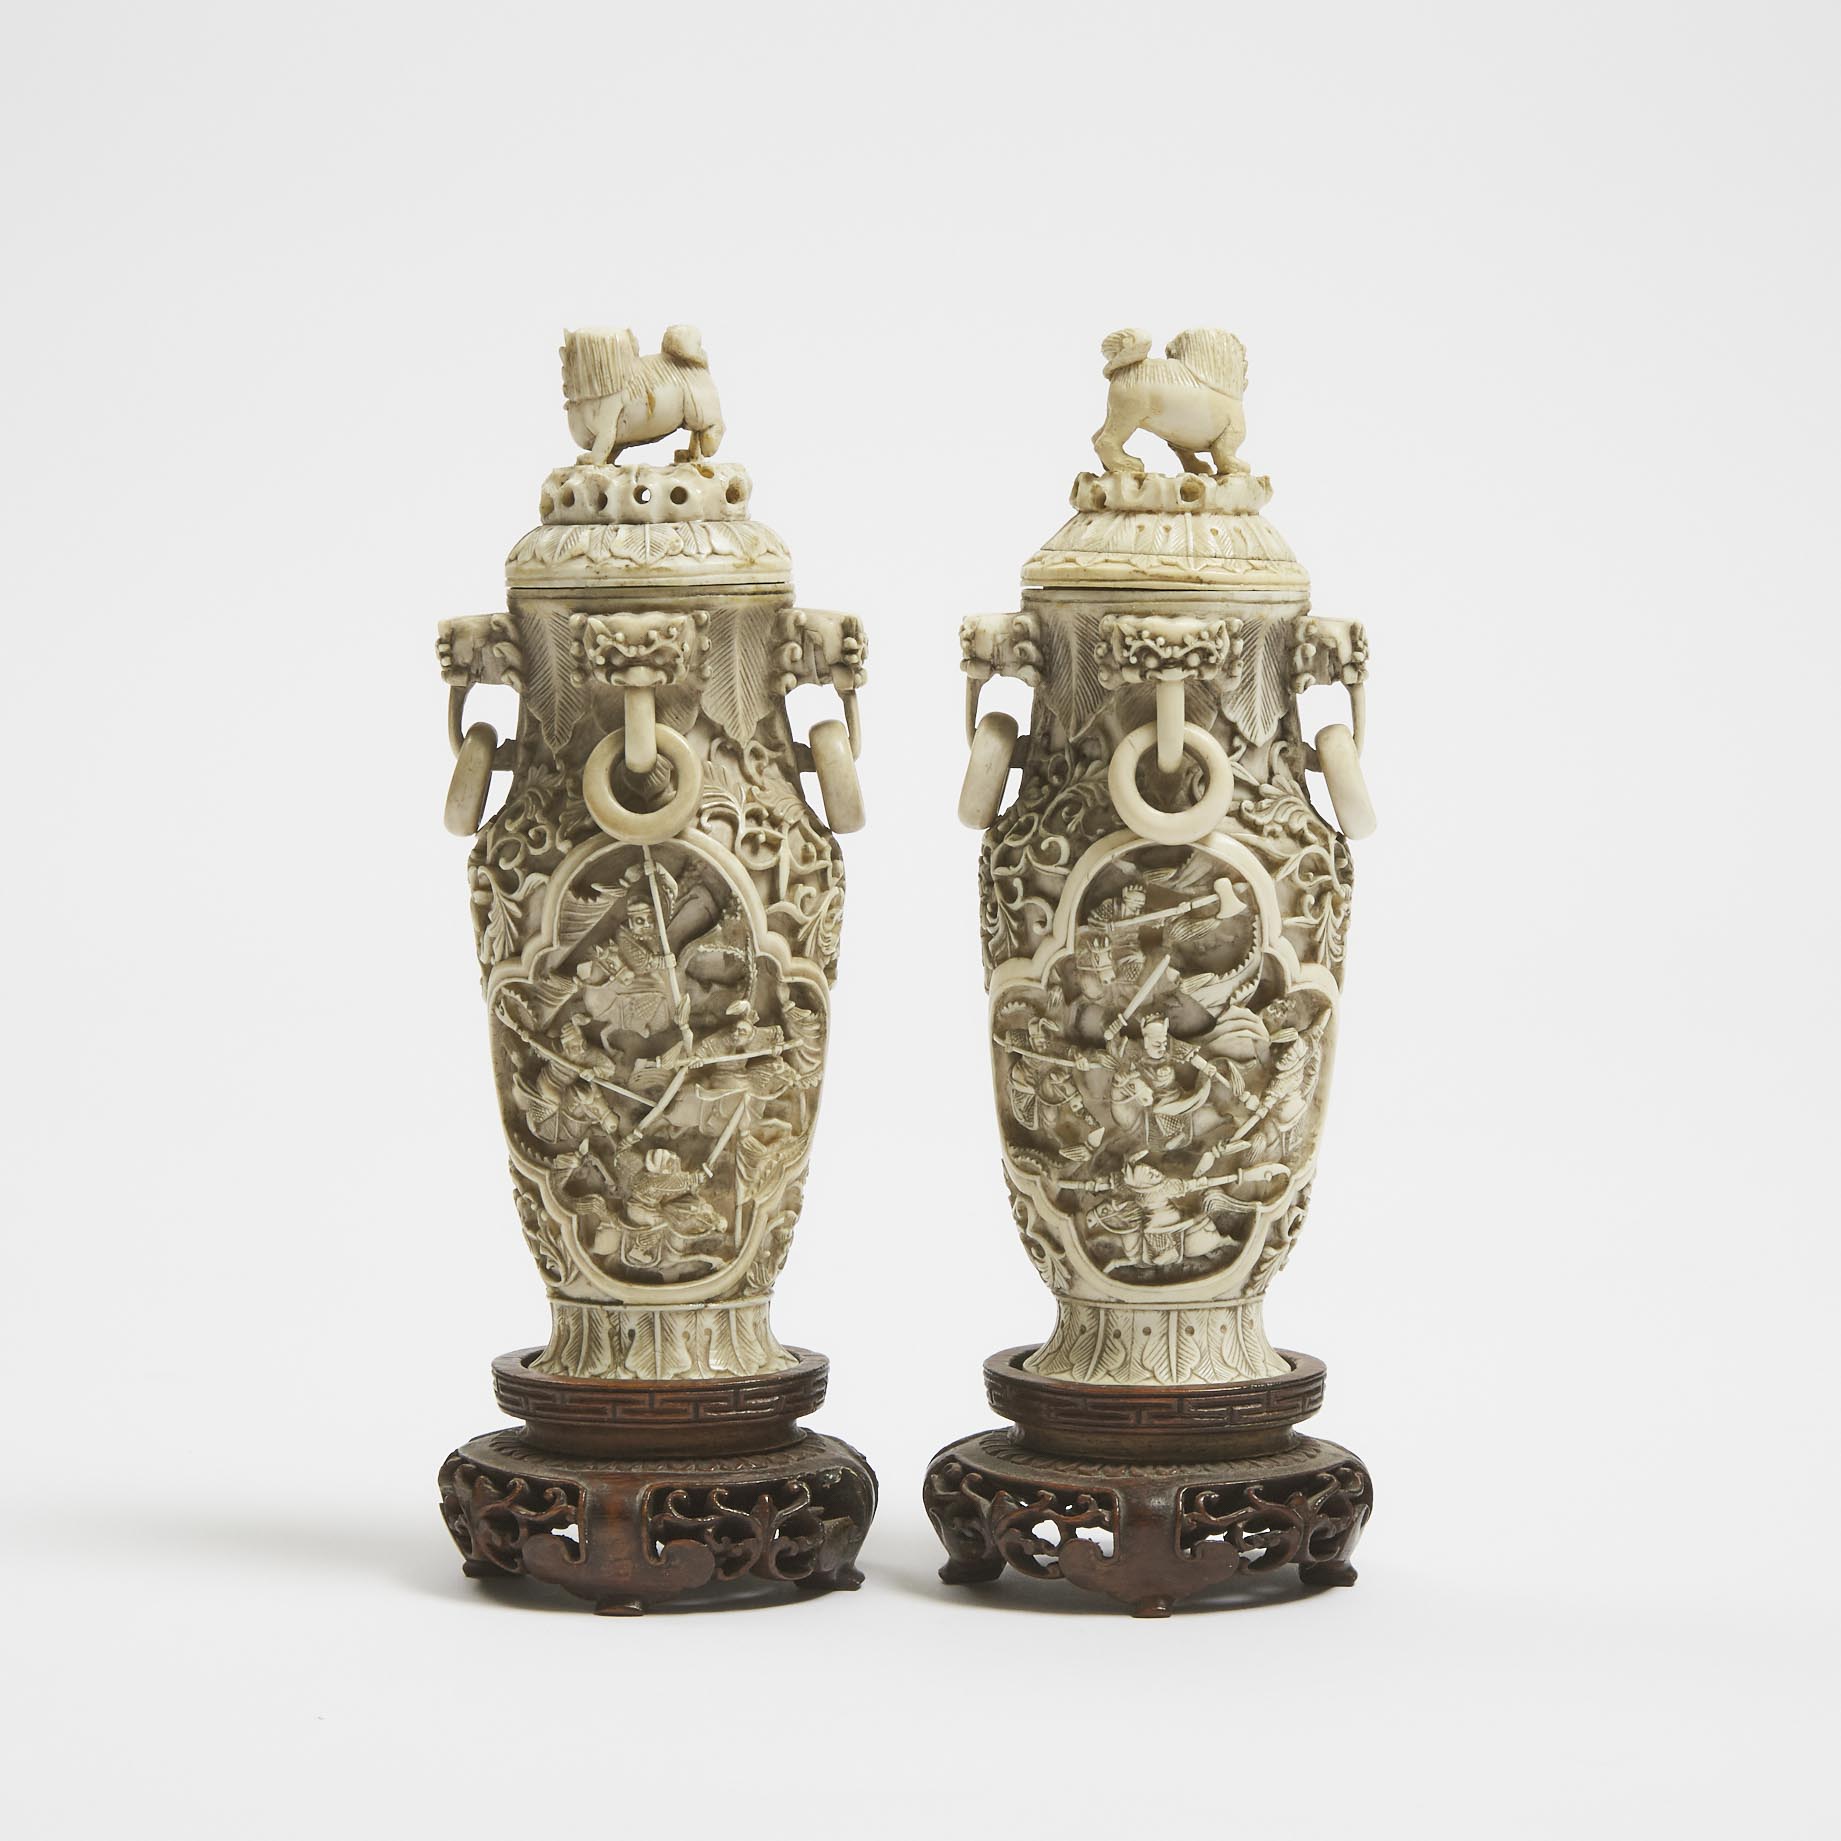 A Pair of Chinese Carved Ivory Vases and Covers, Circa 1900